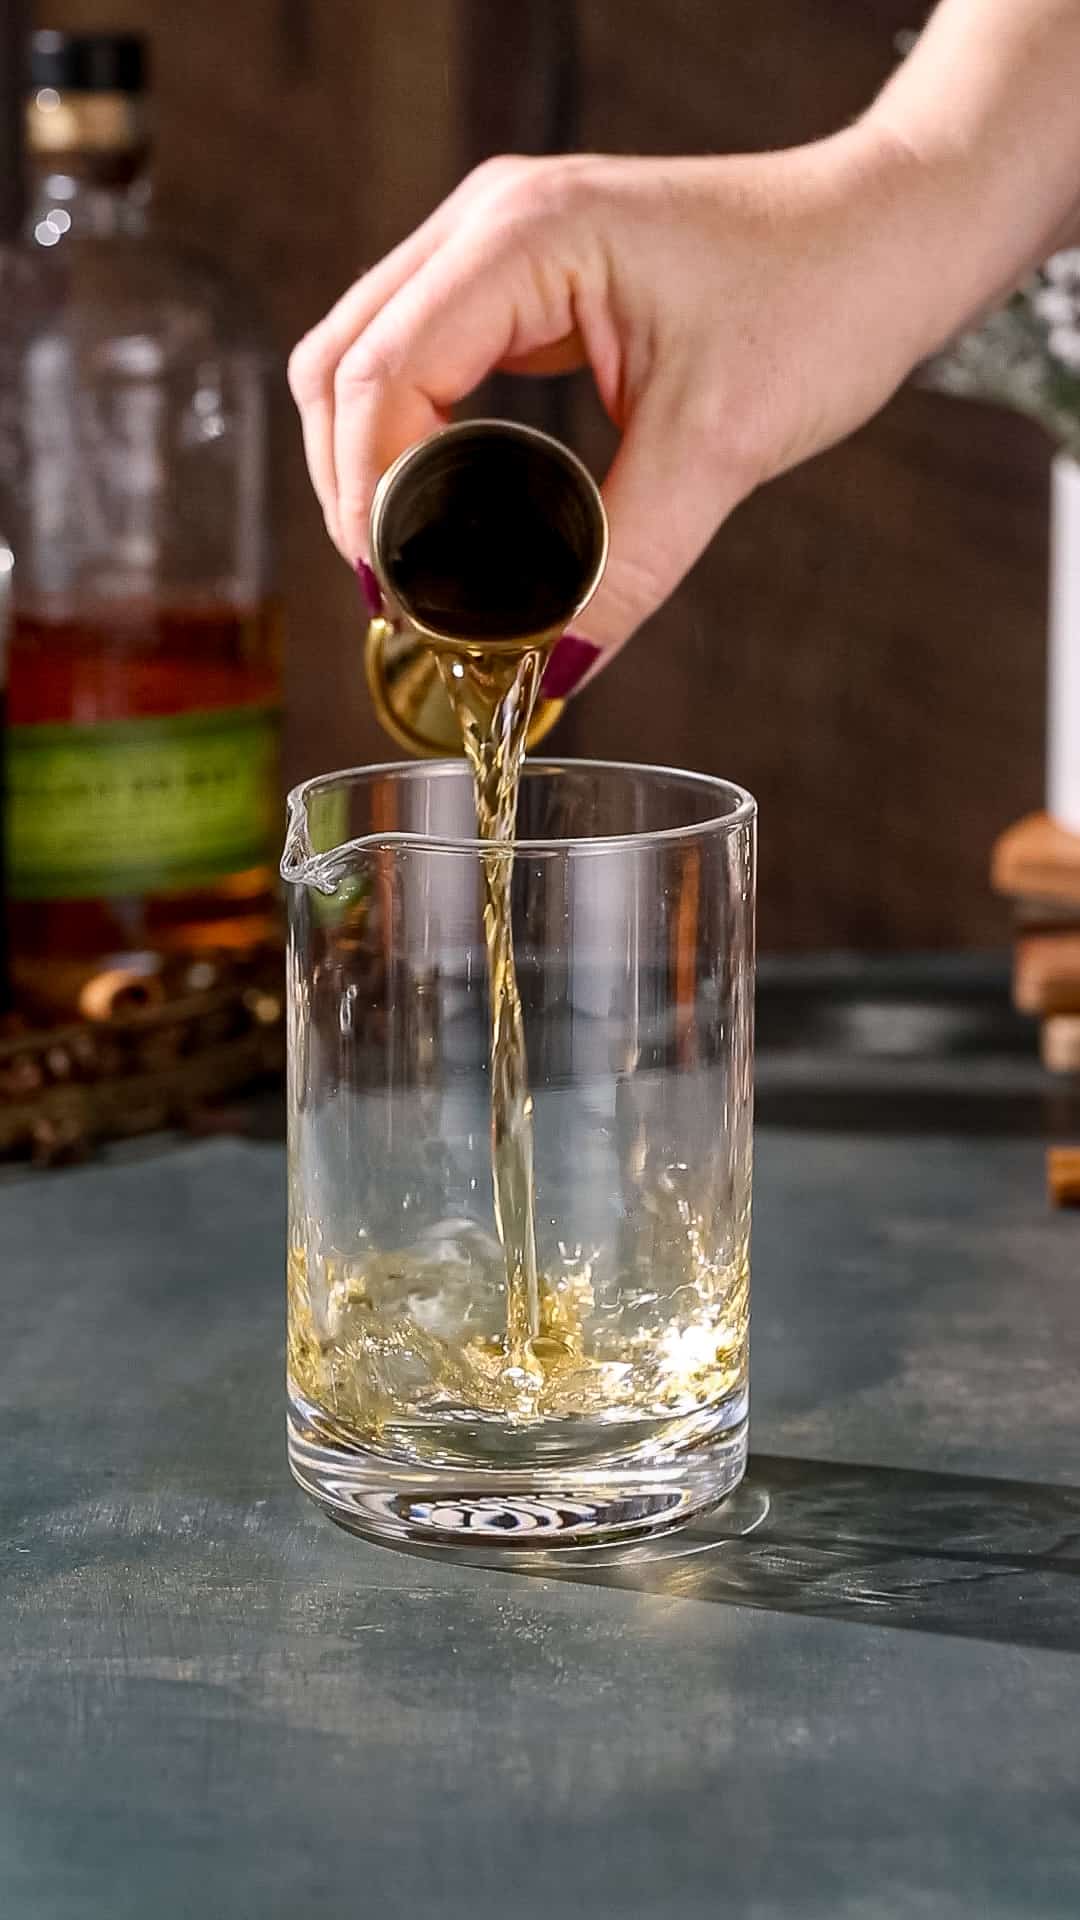 Hand pouring rye whisky into a cocktail stirring glass using a gold jigger.